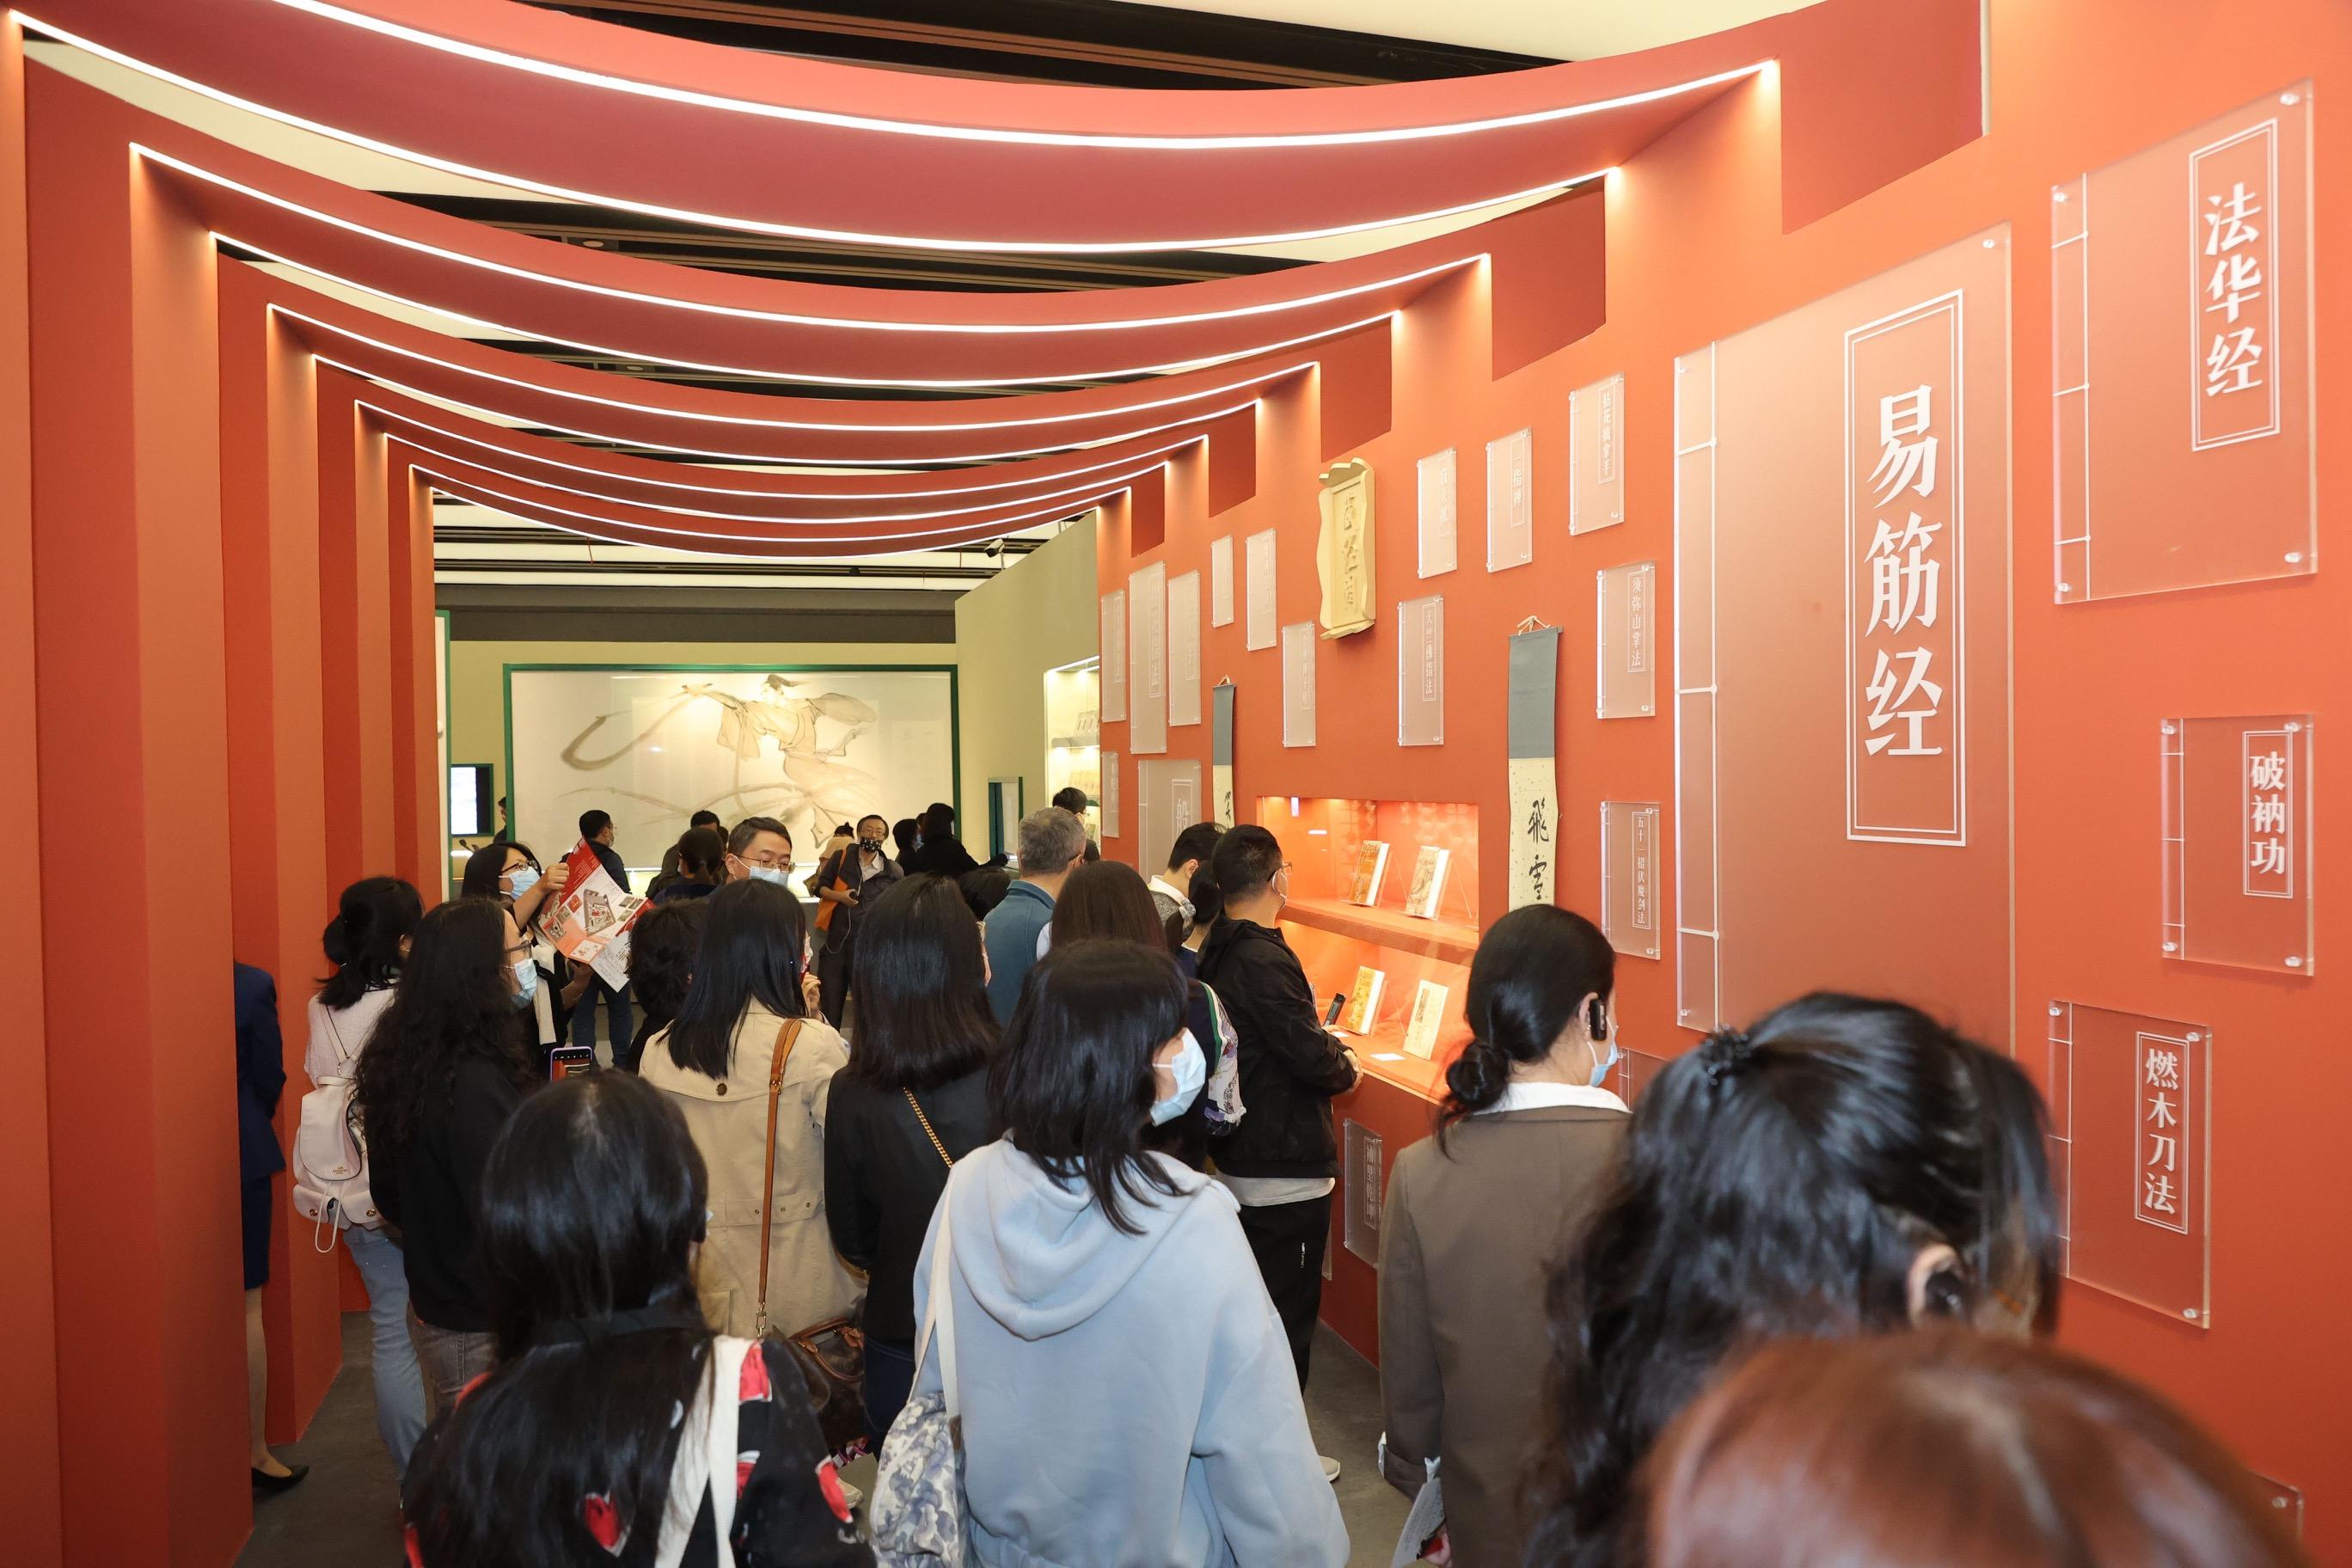 "Jin Yong Exhibition - Shanghai", the thematic exhibition on the veteran journalist and renowned writer Dr Louis Cha (pen name Jin Yong), was successfully concluded today (December 11) at Shanghai Library East. Photo shows audience members visiting the exhibition.